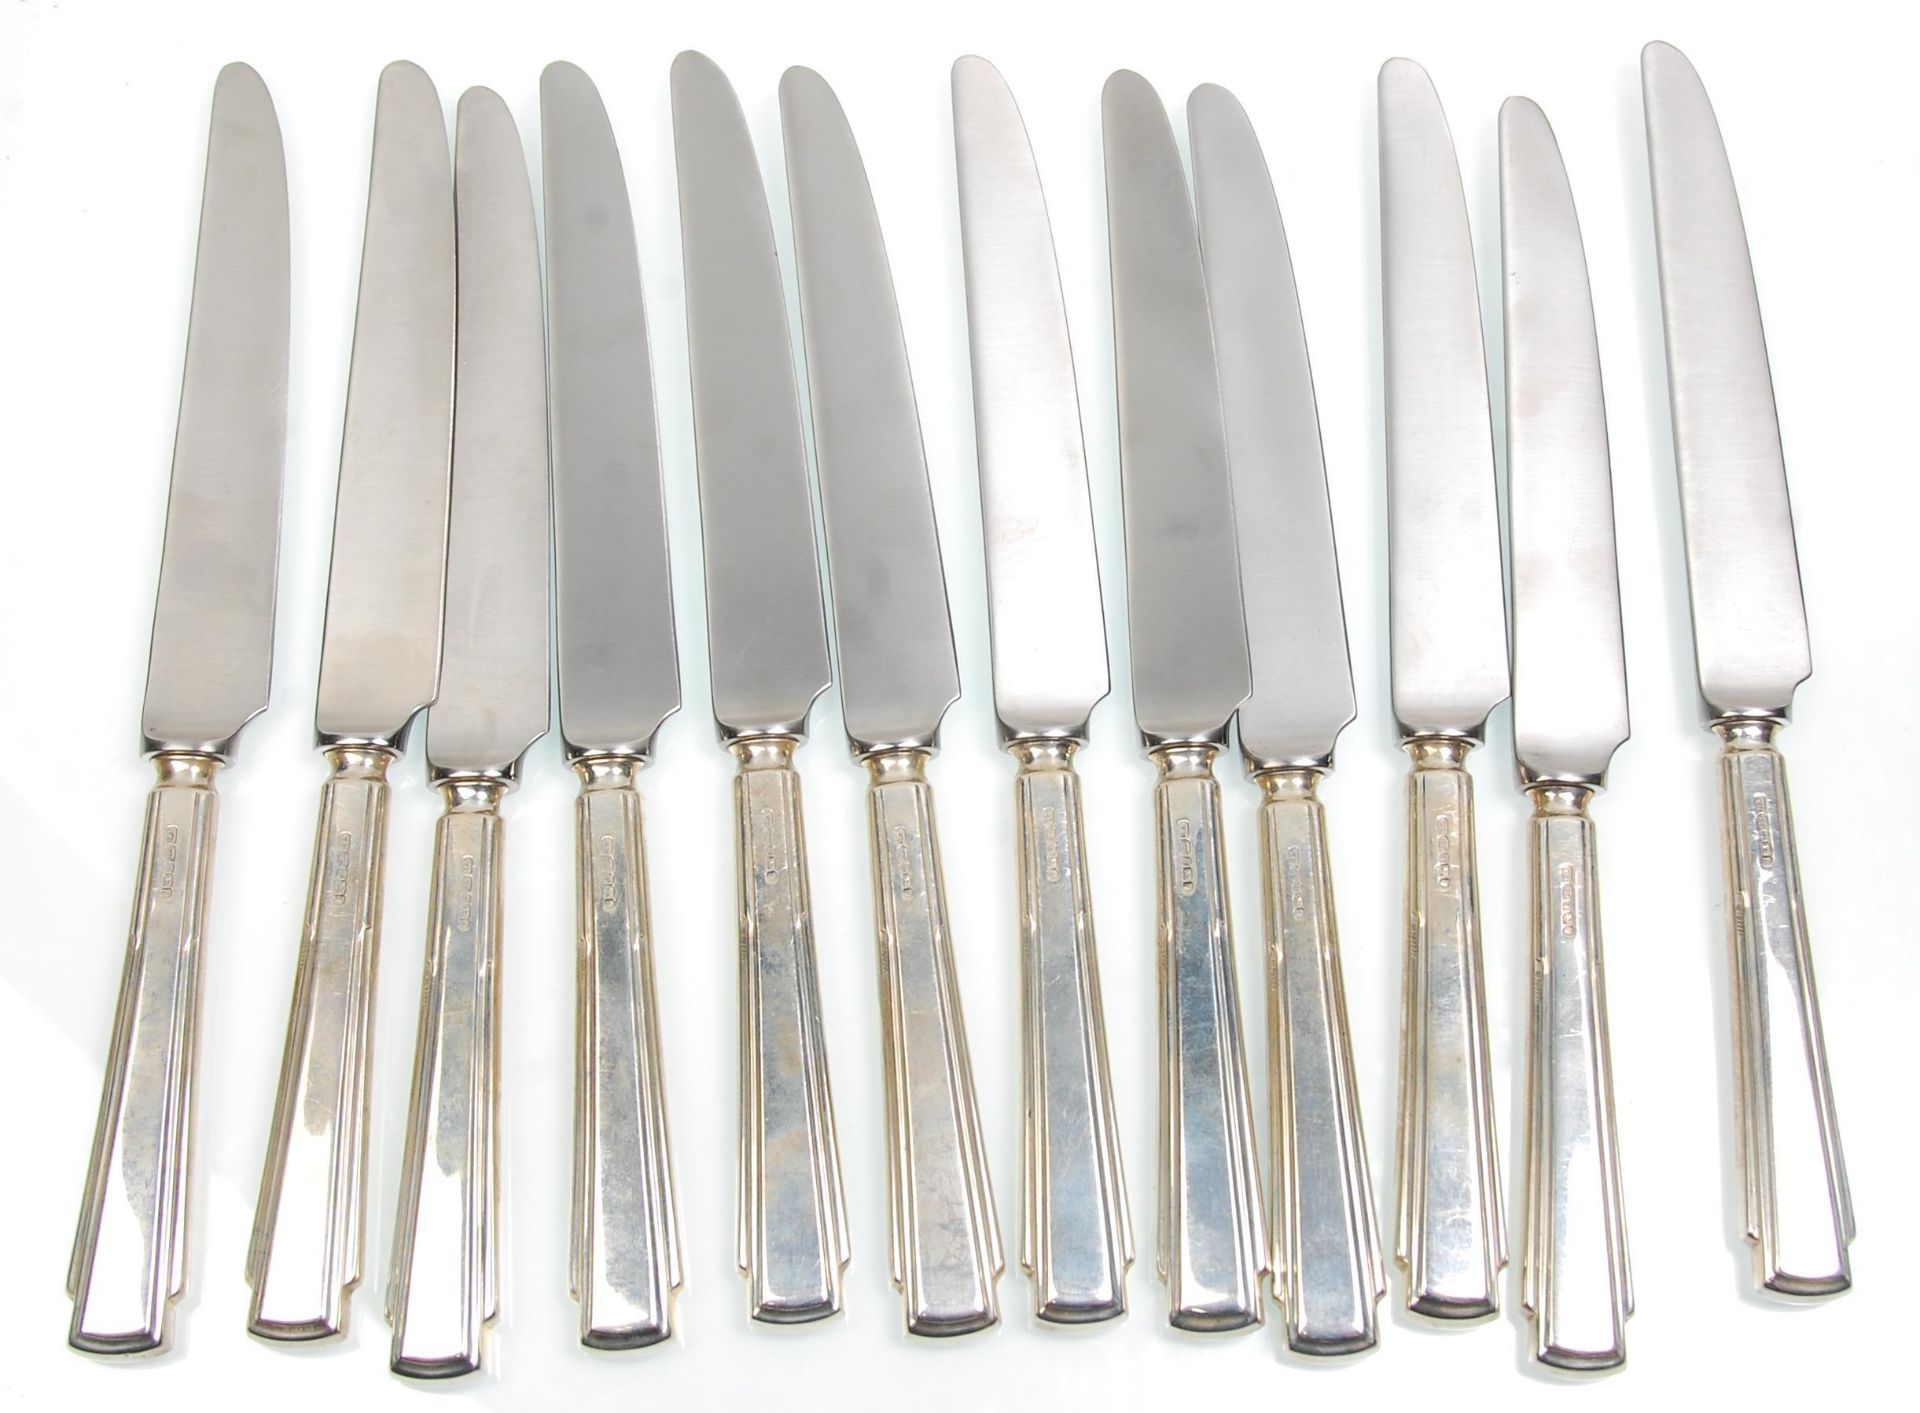 A set of 12 Yates Brothers silver handled knives, having stepped form handles. Each handle